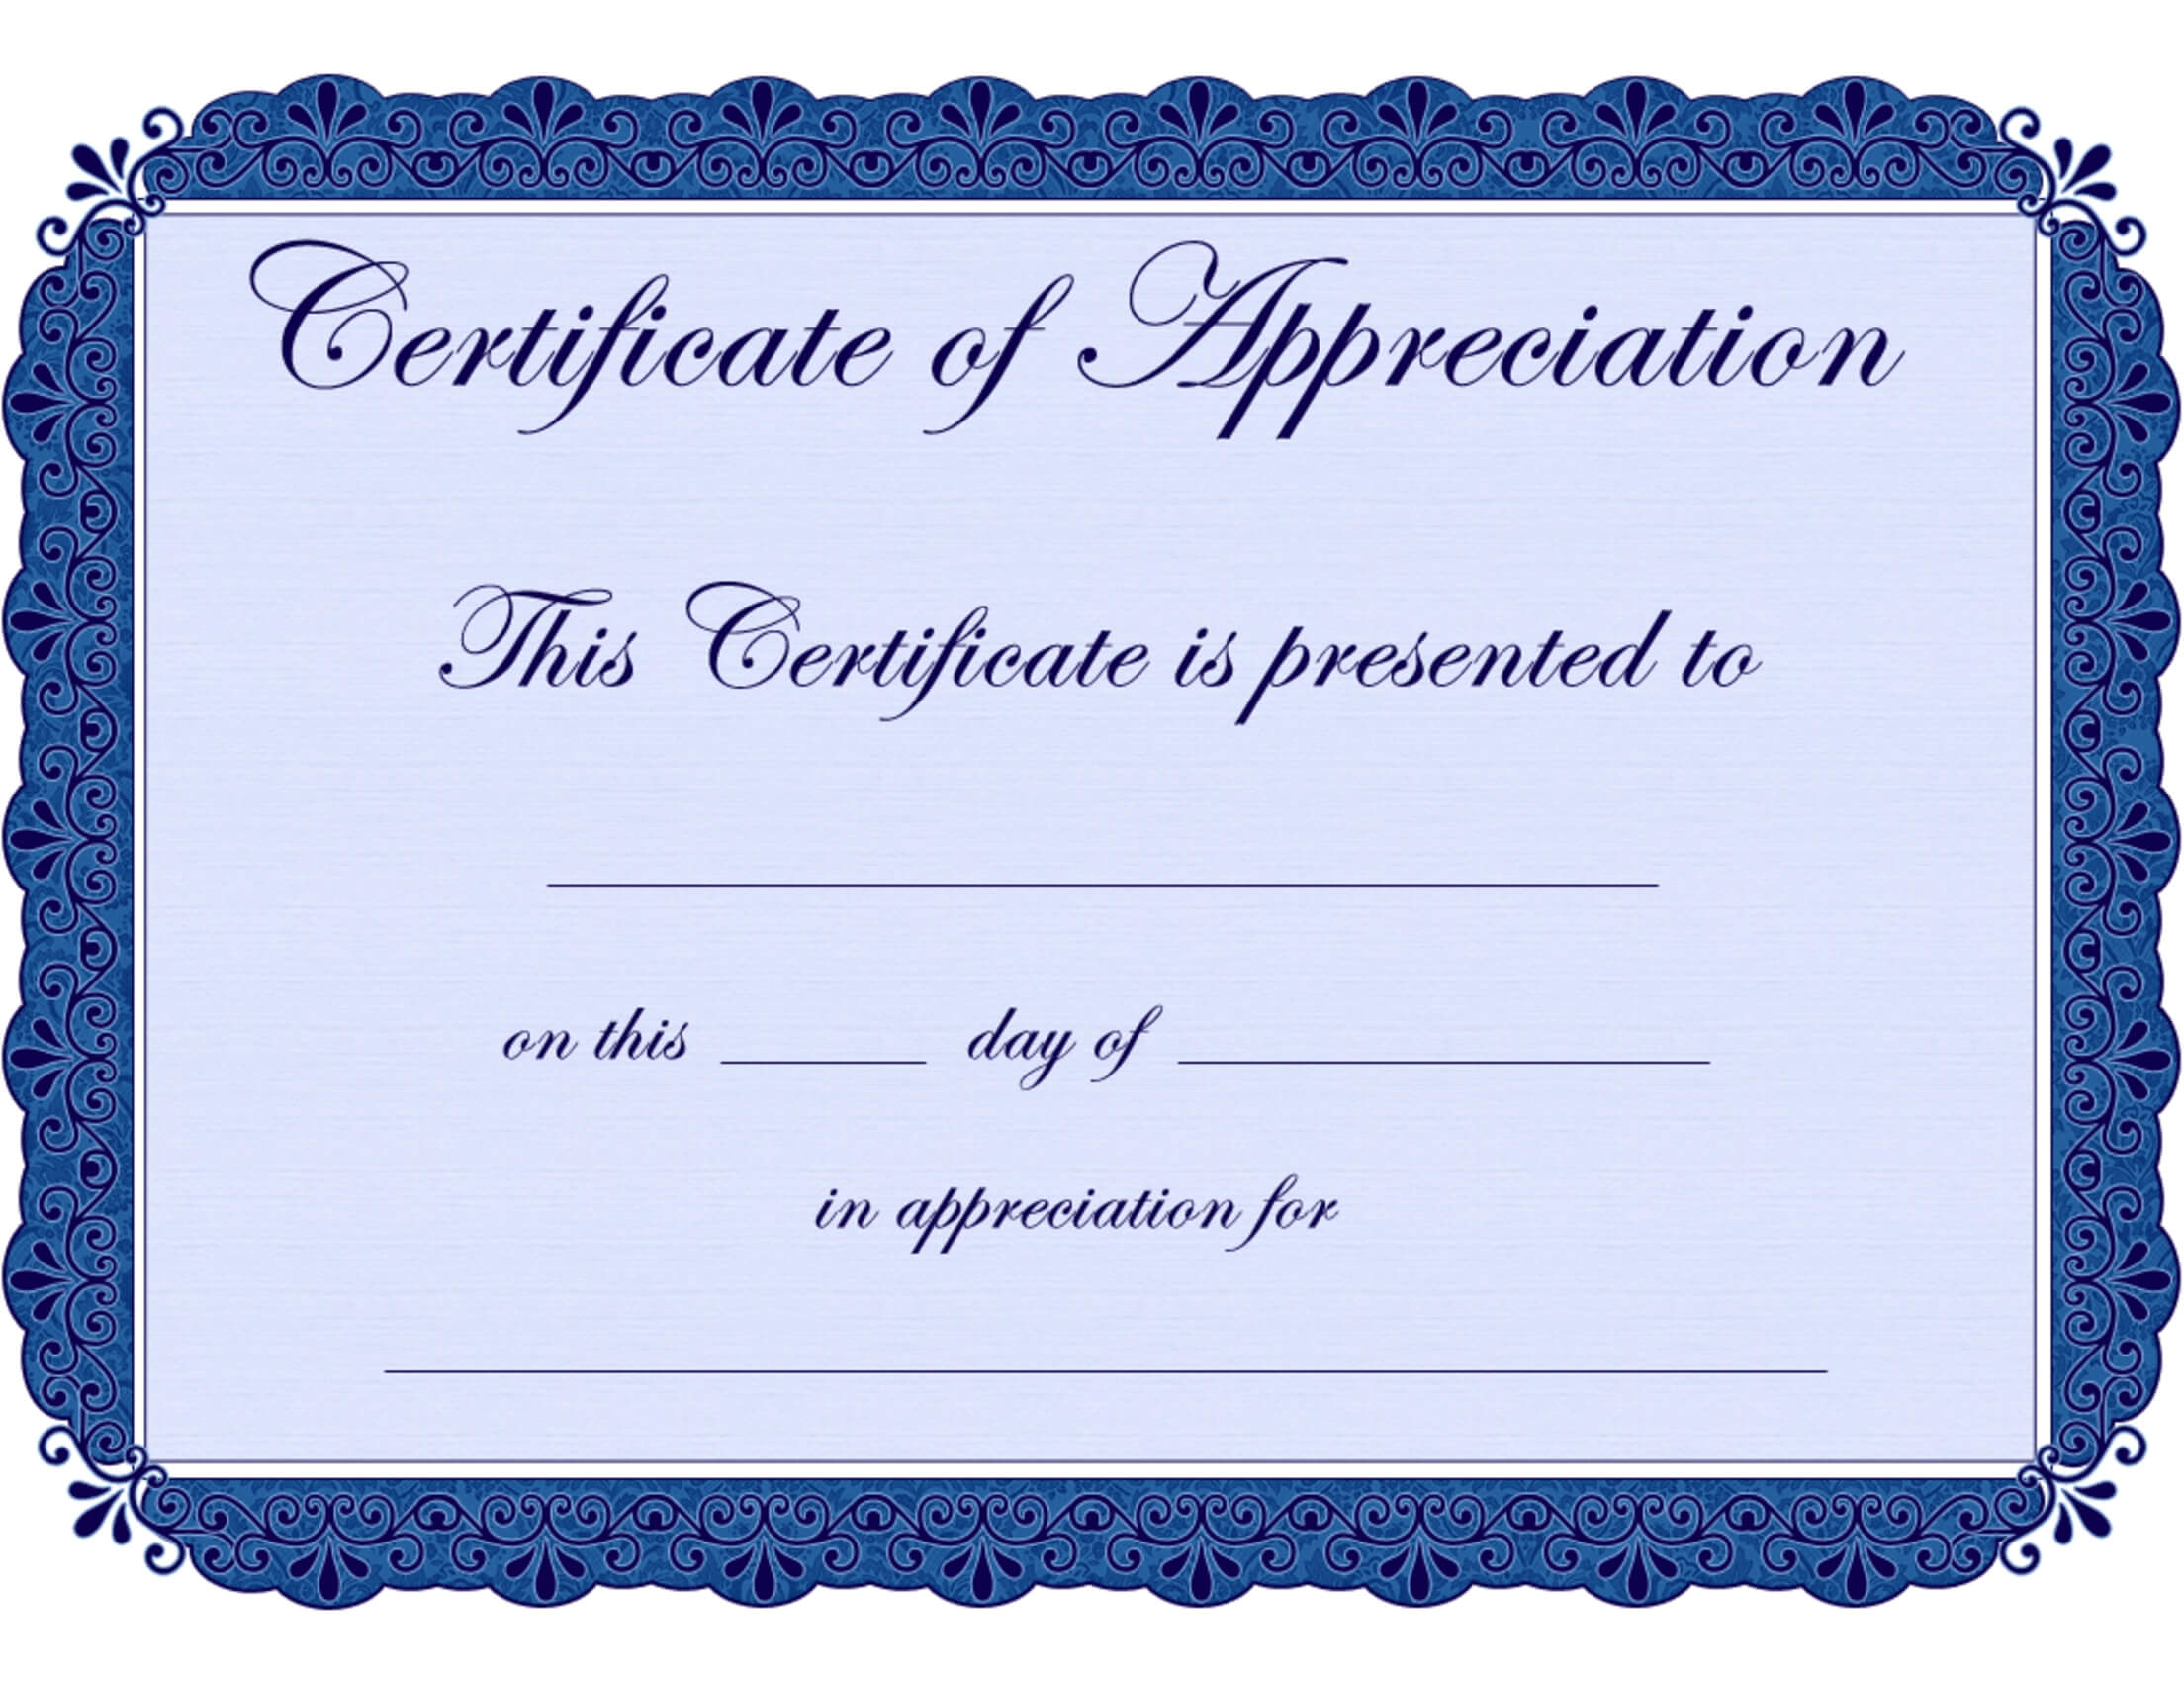 Certificate Template Recognition | Onlinefortrendy.xyz In Template For Certificate Of Appreciation In Microsoft Word